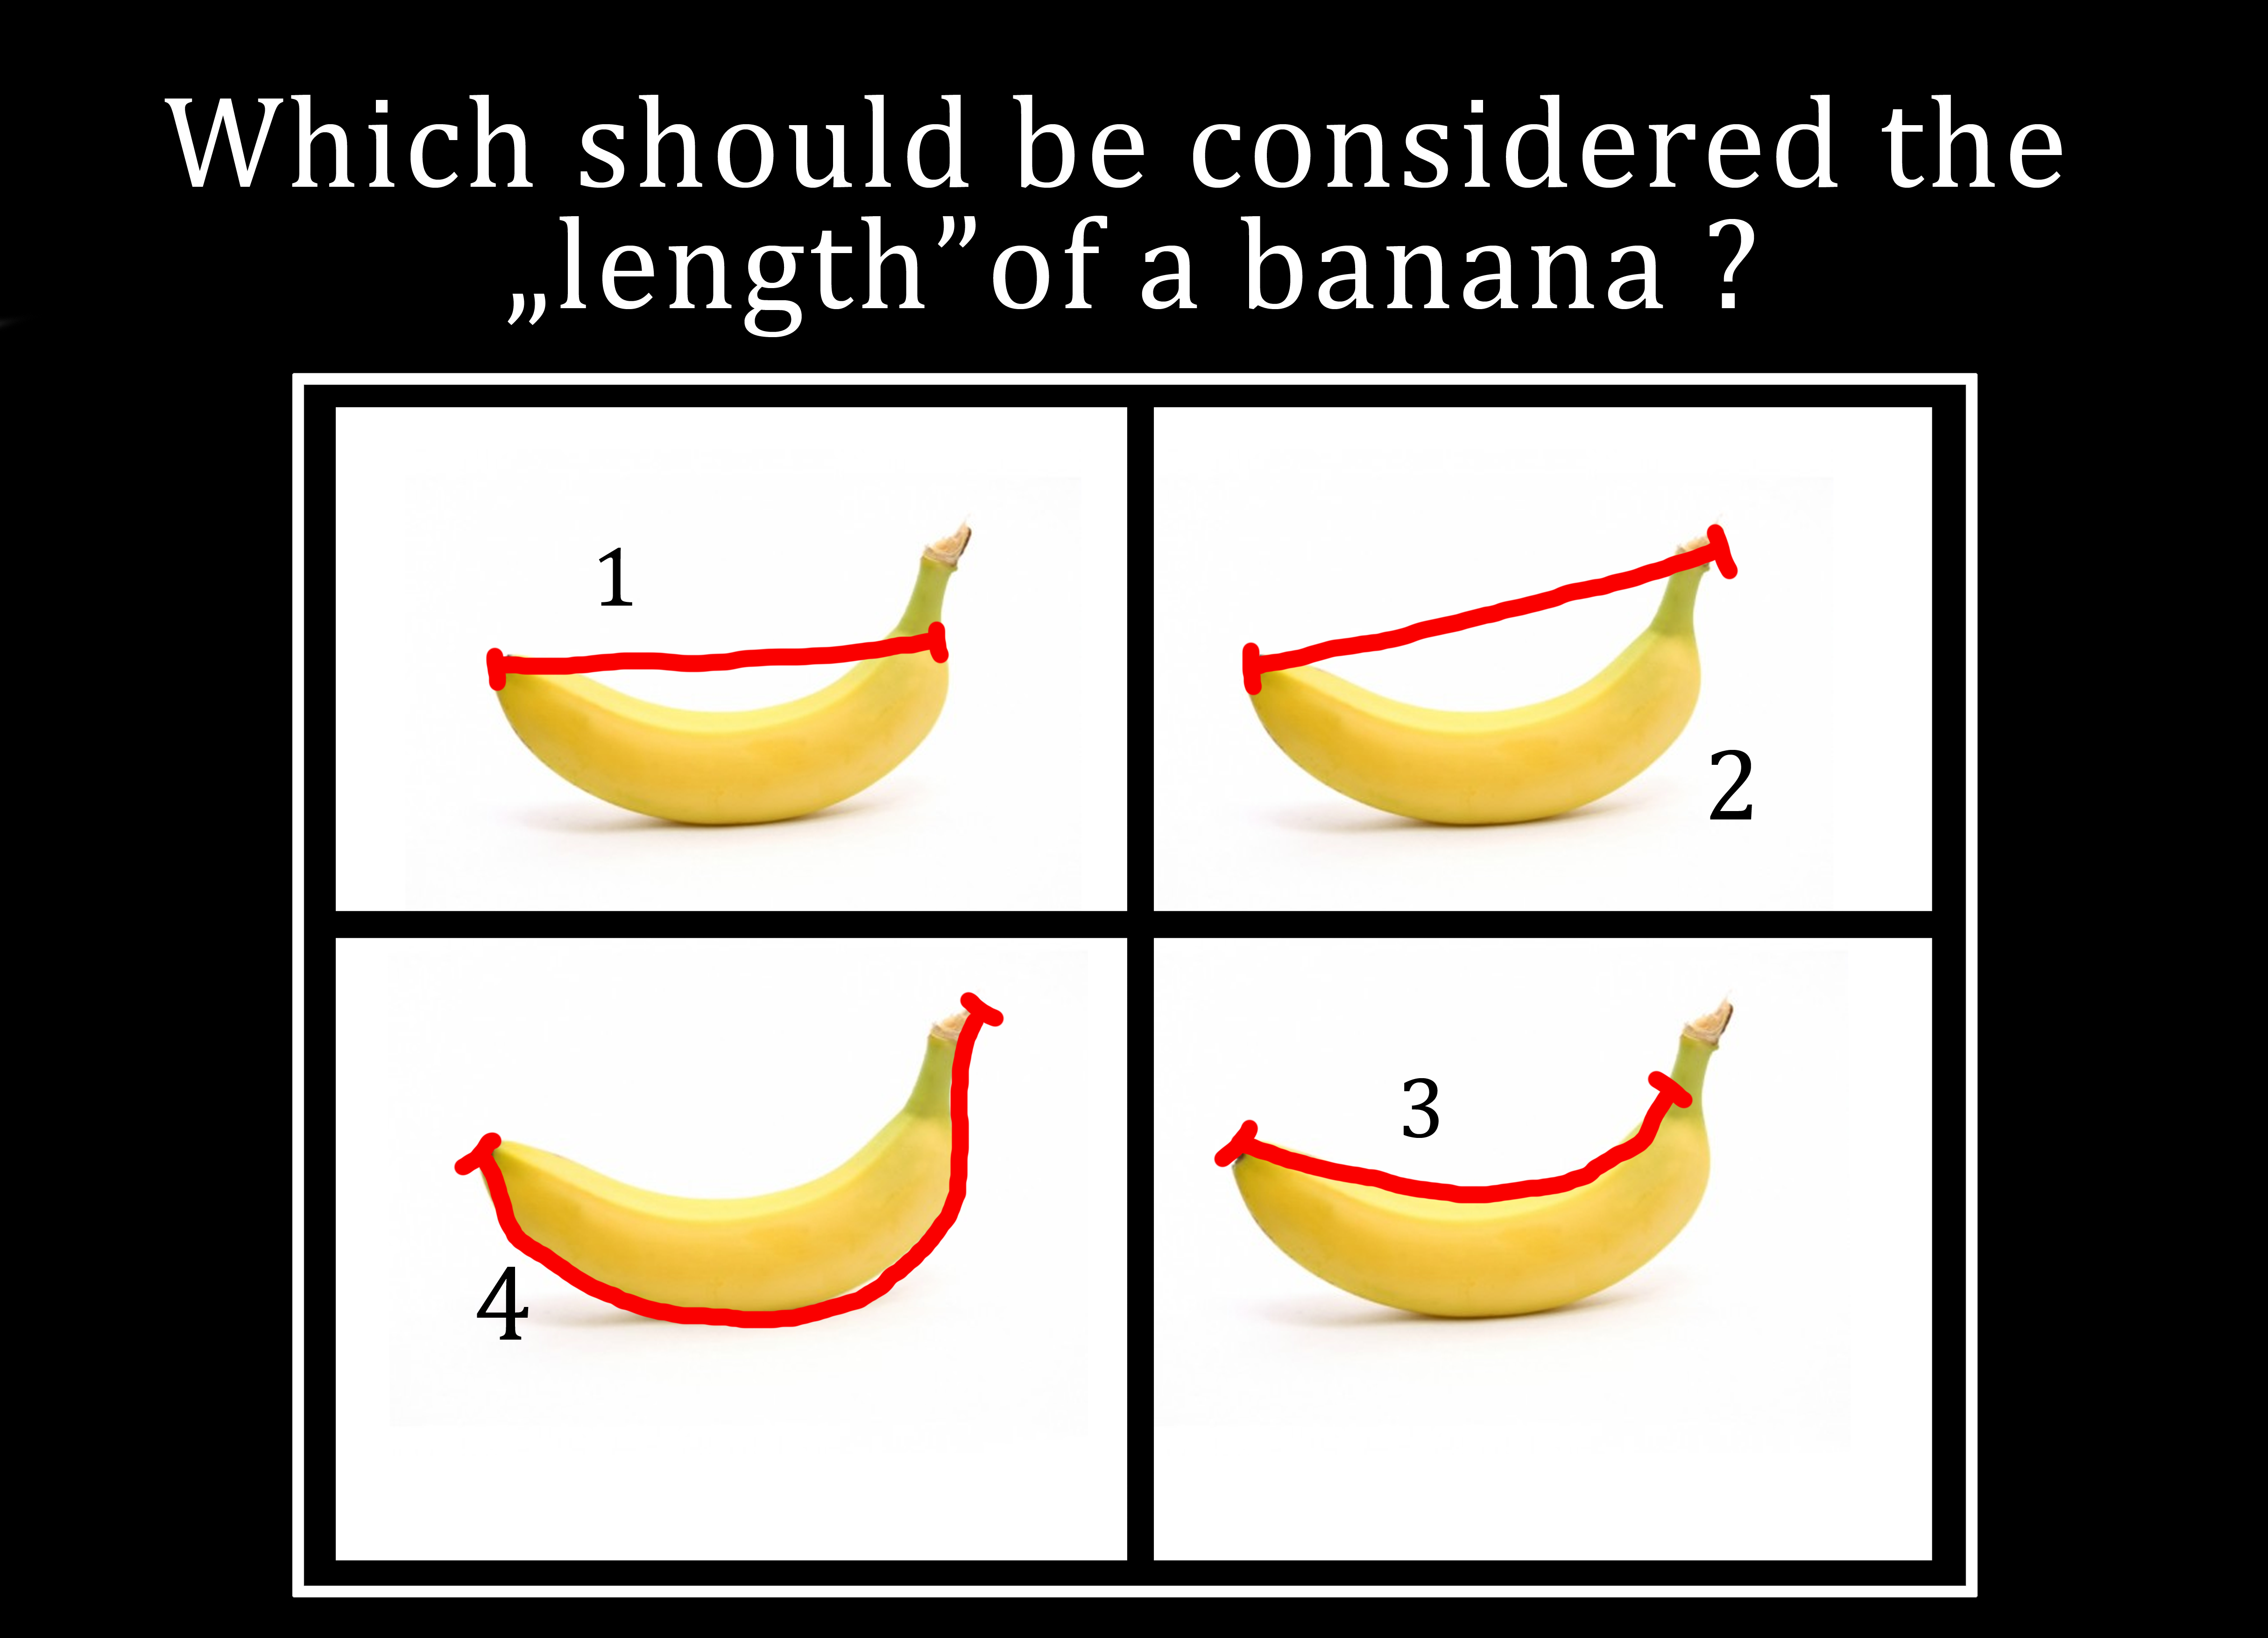 fresh memes - banana family - Which should be considered the length"of a banana ? 1 N 3 4